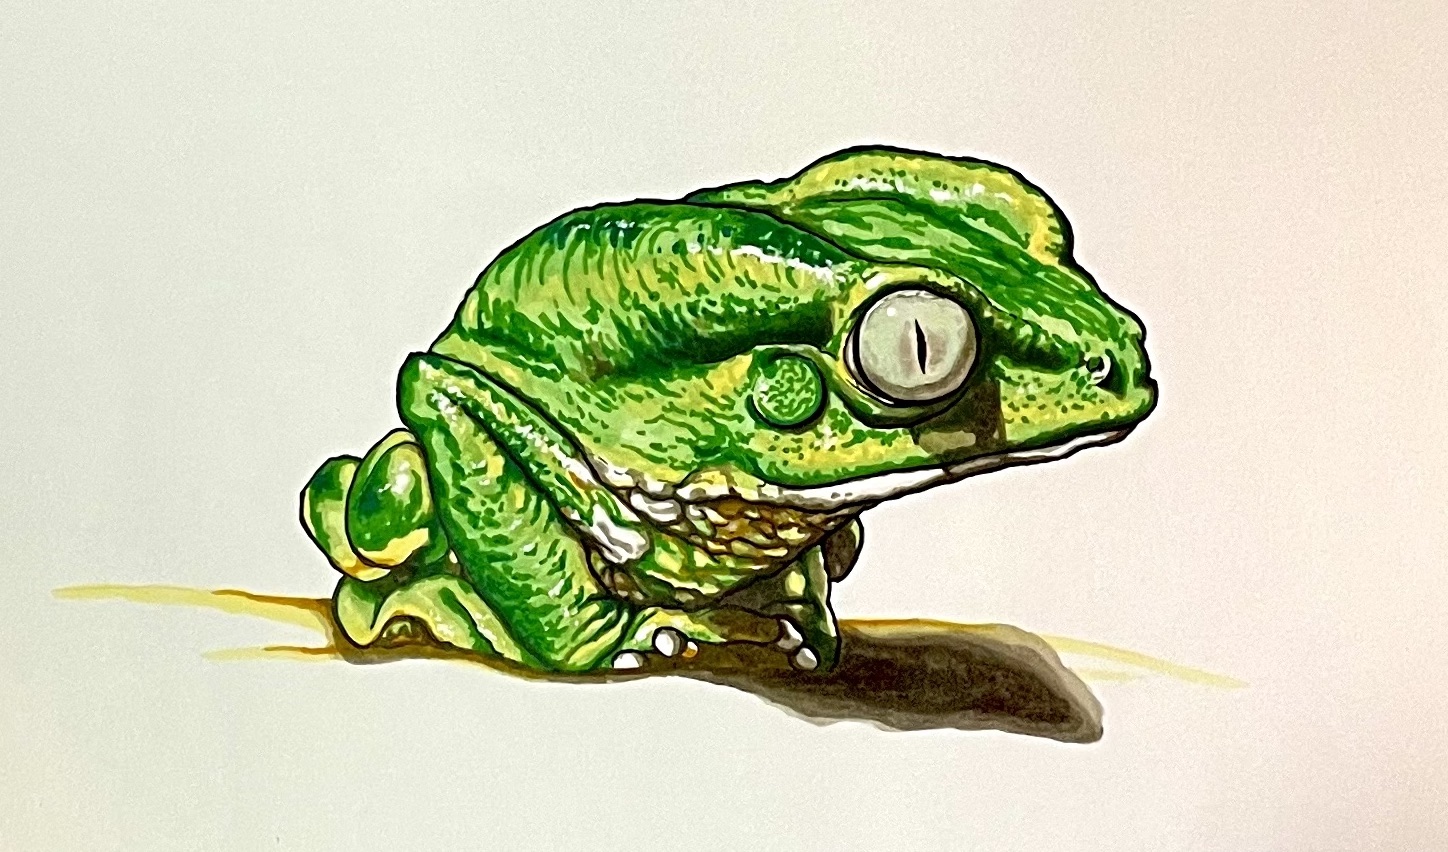 Learn how to draw and color a realistic common walking leaf frog - Phyllomedusa burmeisteri - steps by steps with video